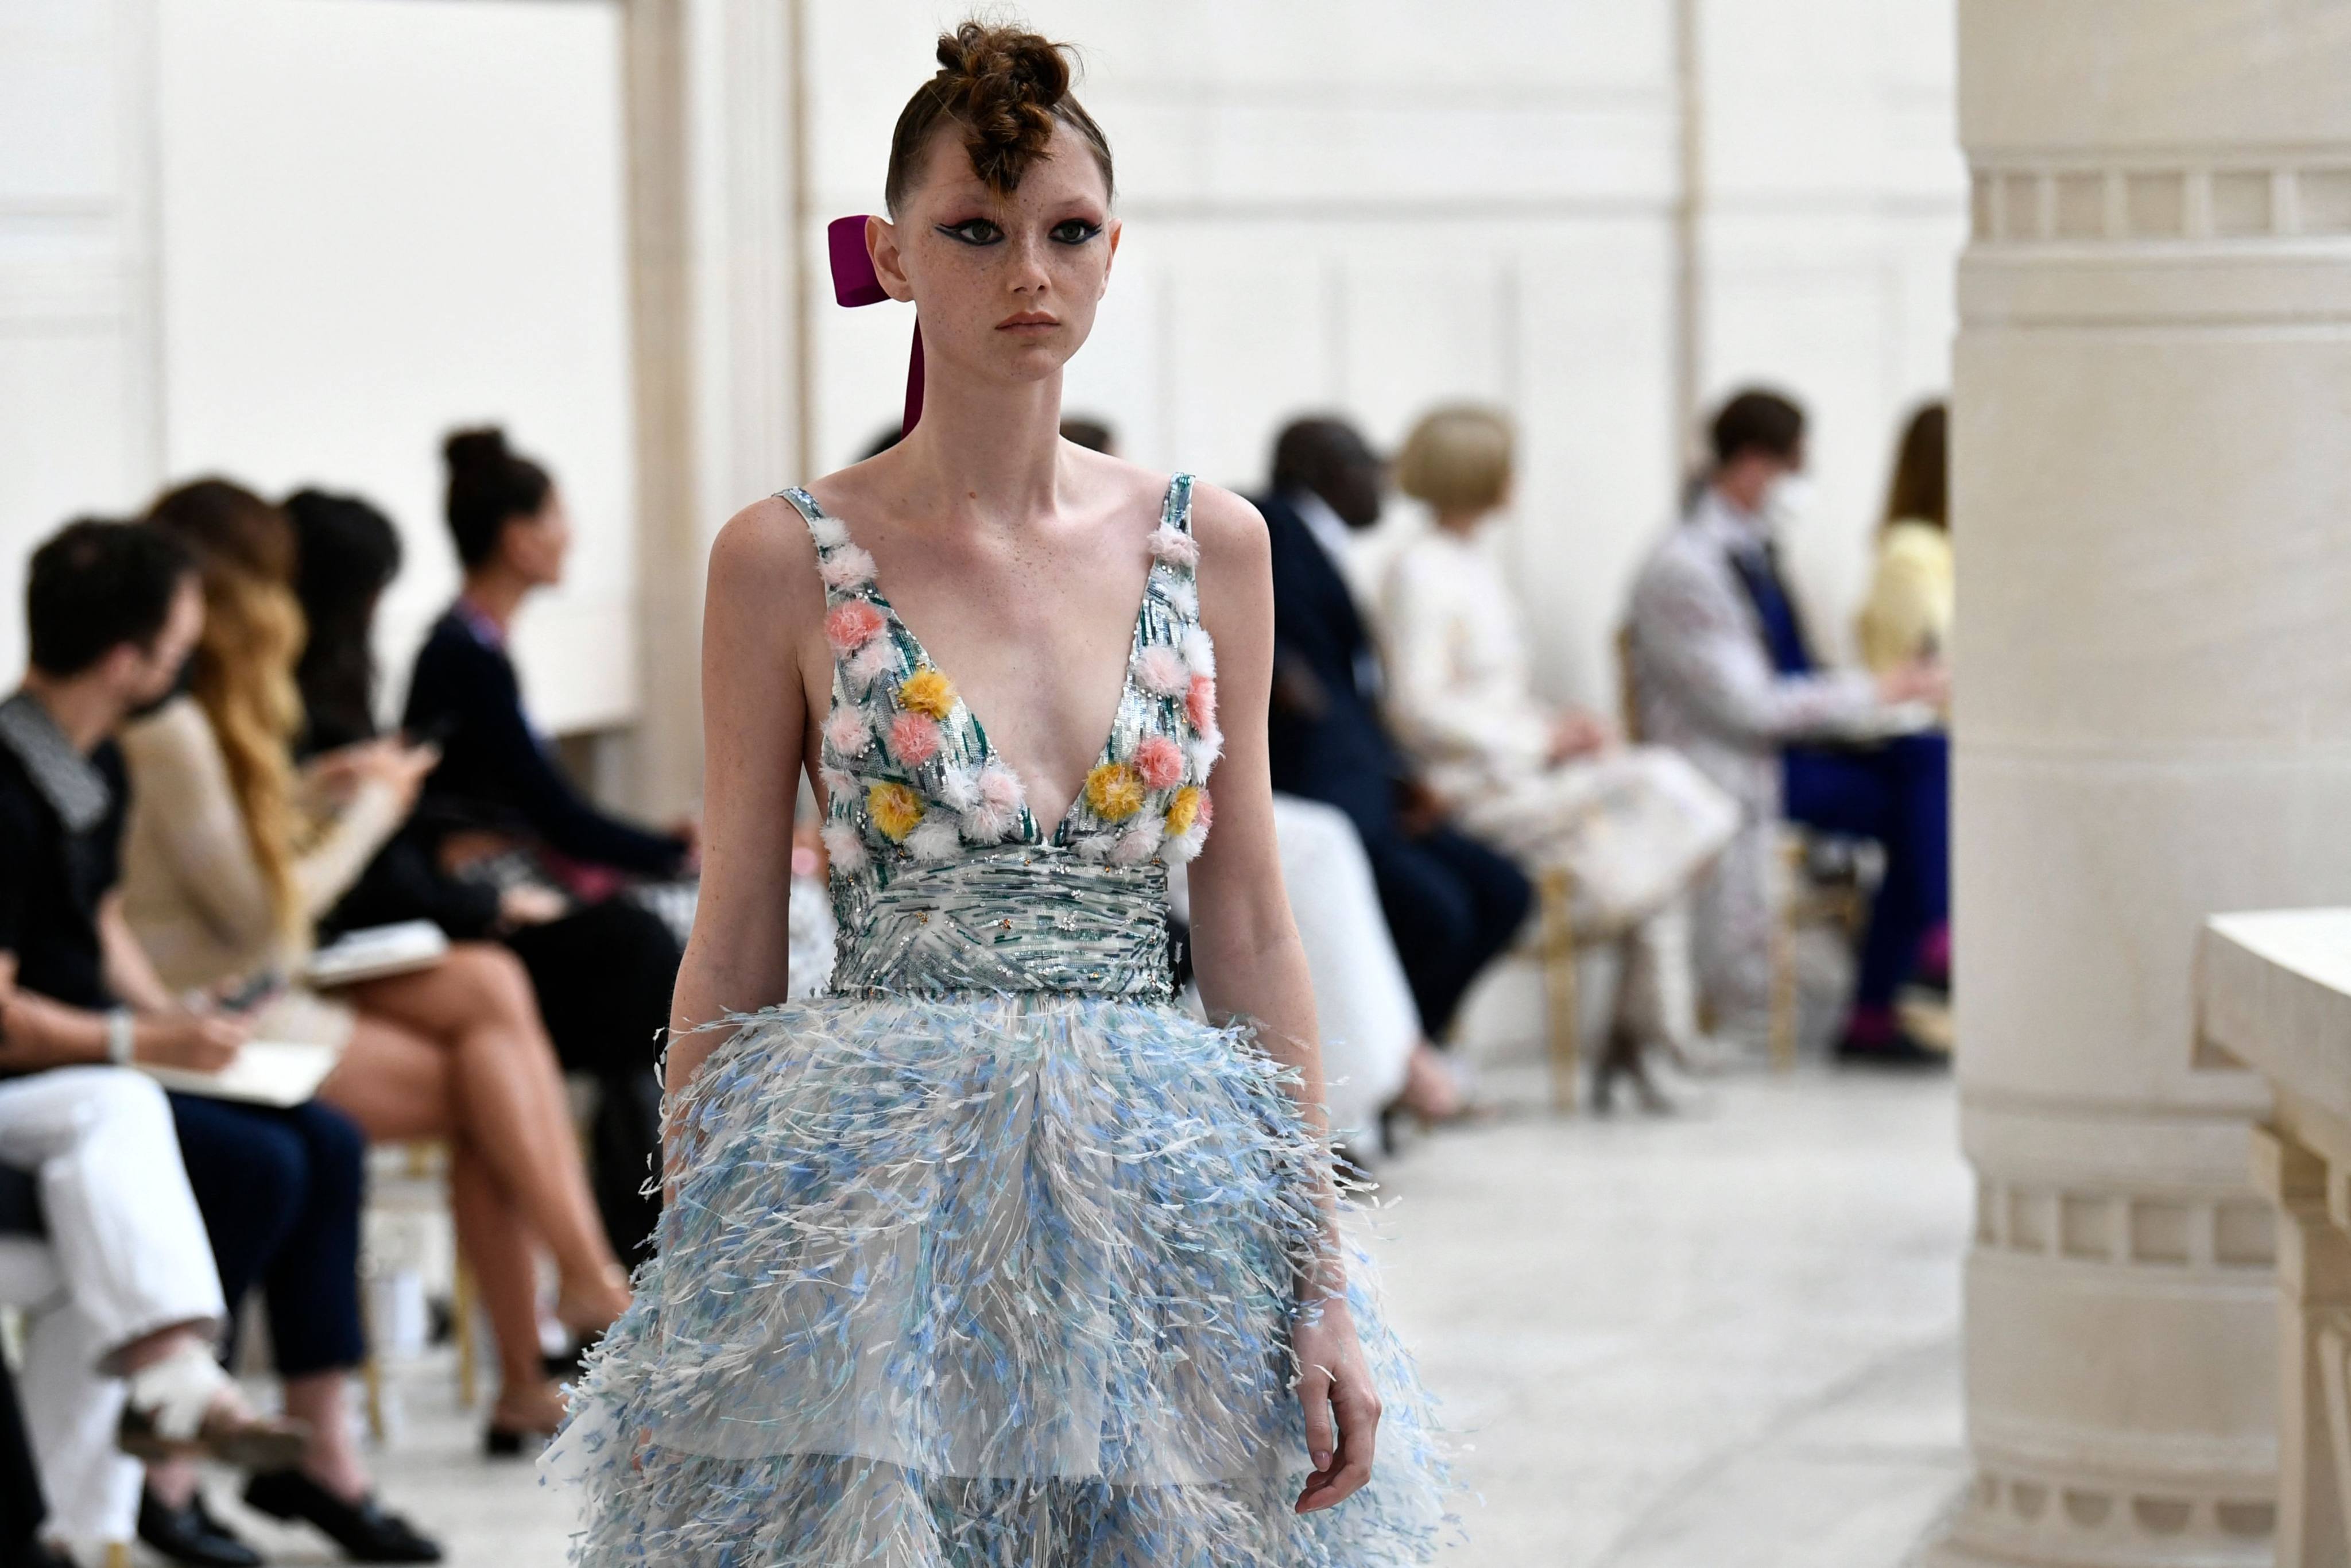 Full of romance: Chanel’s autumn/winter 2021-2022 haute couture collection fashion show at the Palais Galliera in Paris, on July 6, 2021. Photo: AFP